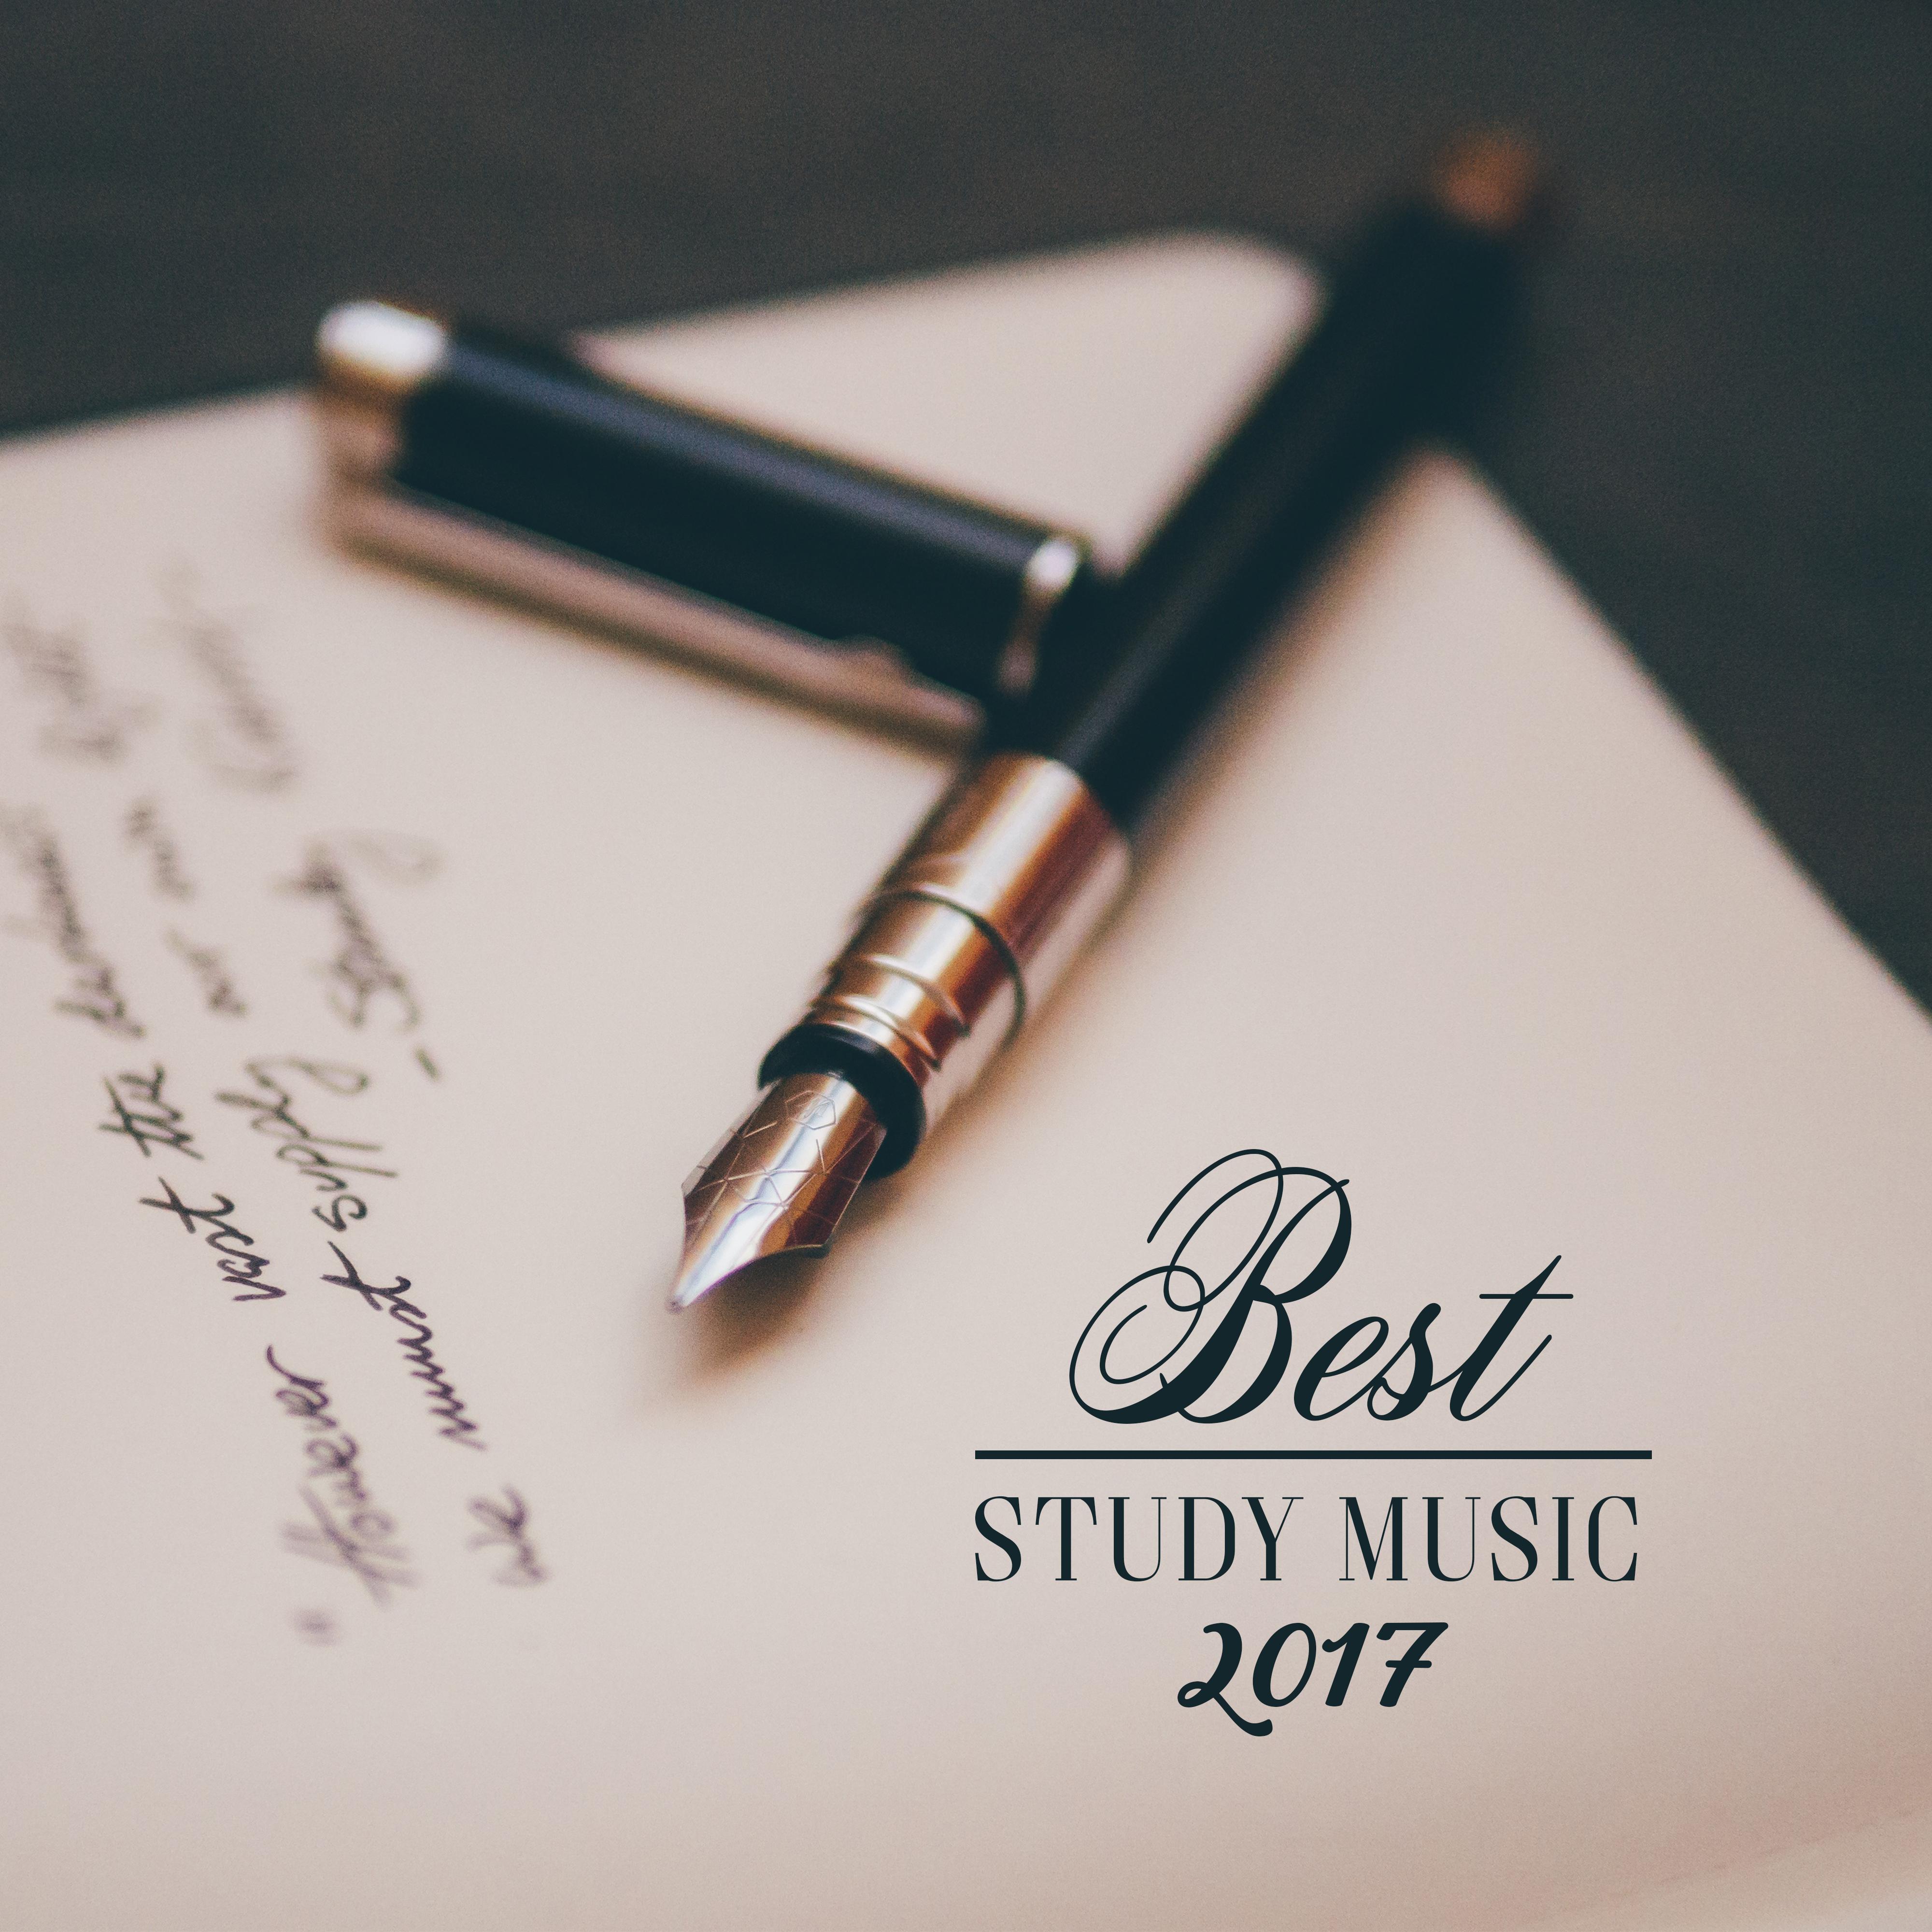 Best Study Music 2017  Easy Learning, Focus, Better Concentration, Stress Relief, Mozart, Bach to Work